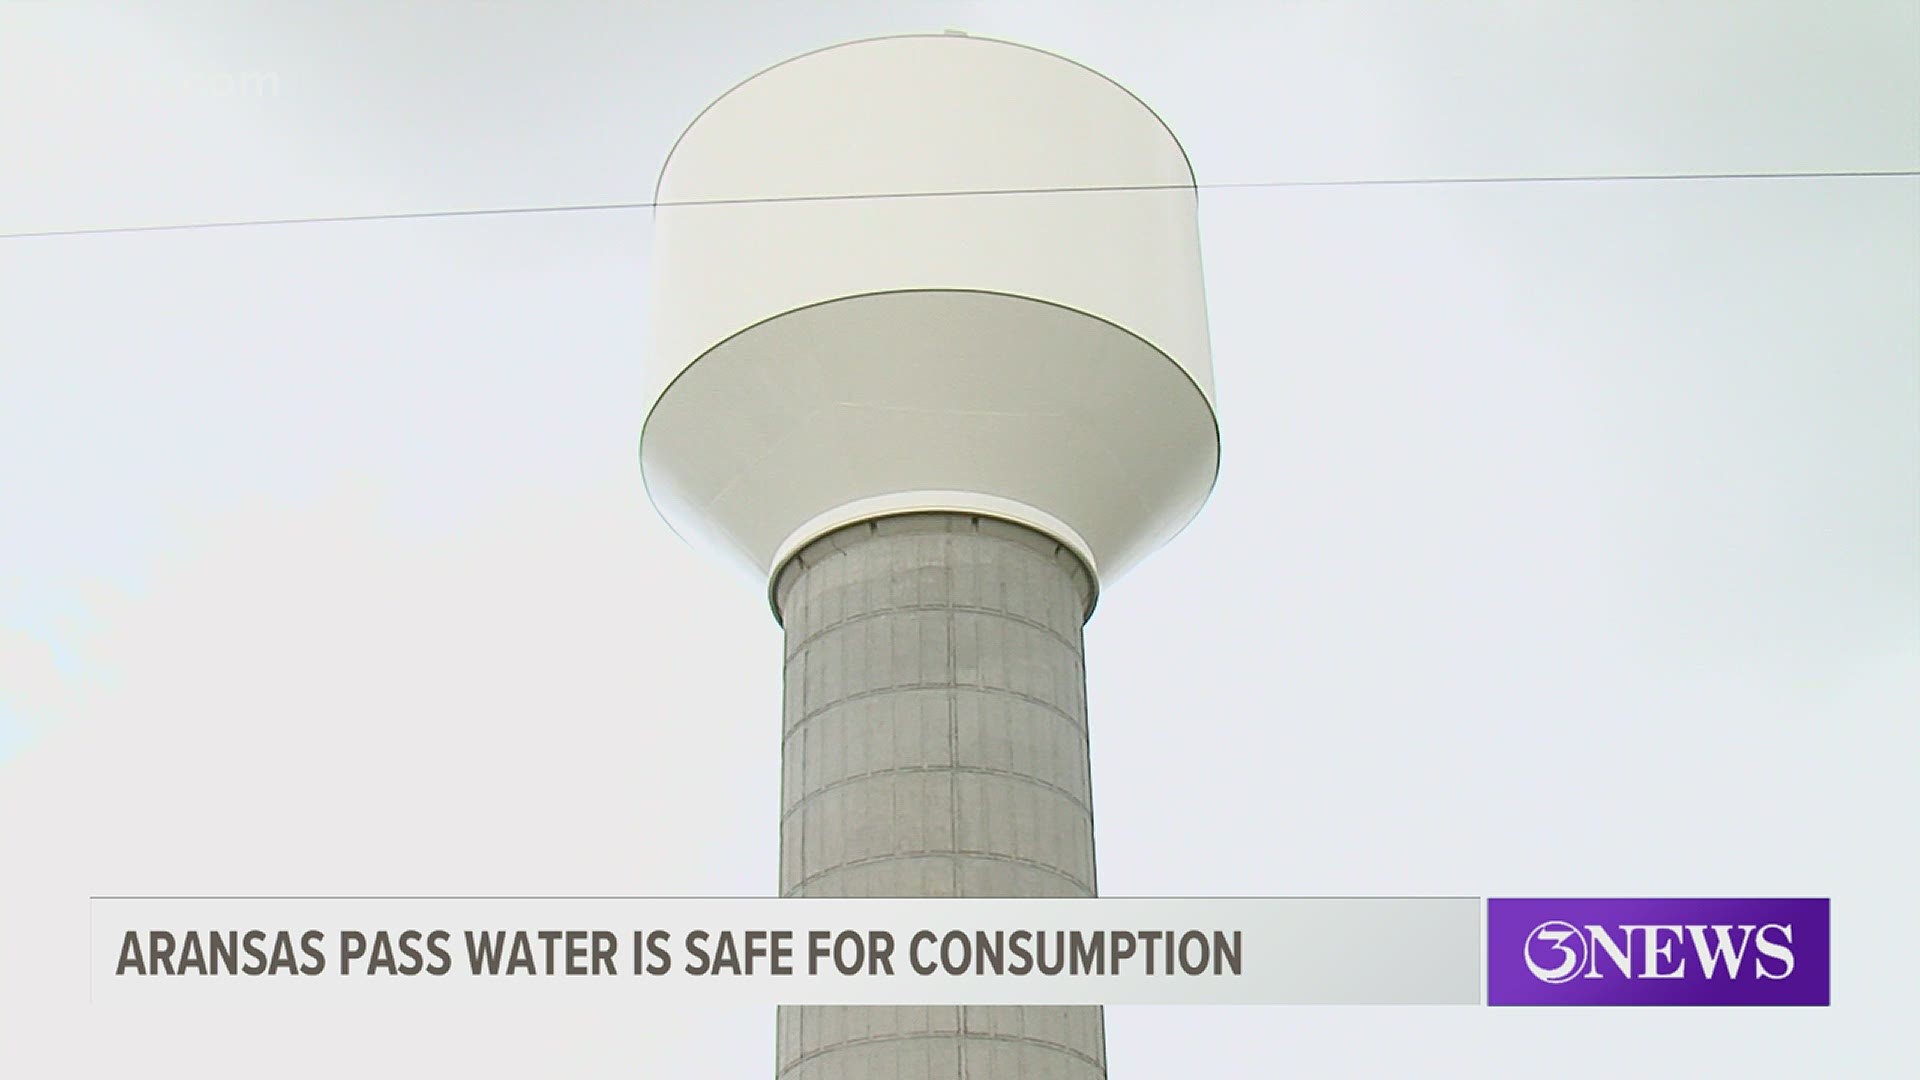 The more than 36 hour water use ban in Aransas Pass is over. The Texas Commission on Environmental Quality has given the all clear for residents to resume water use.